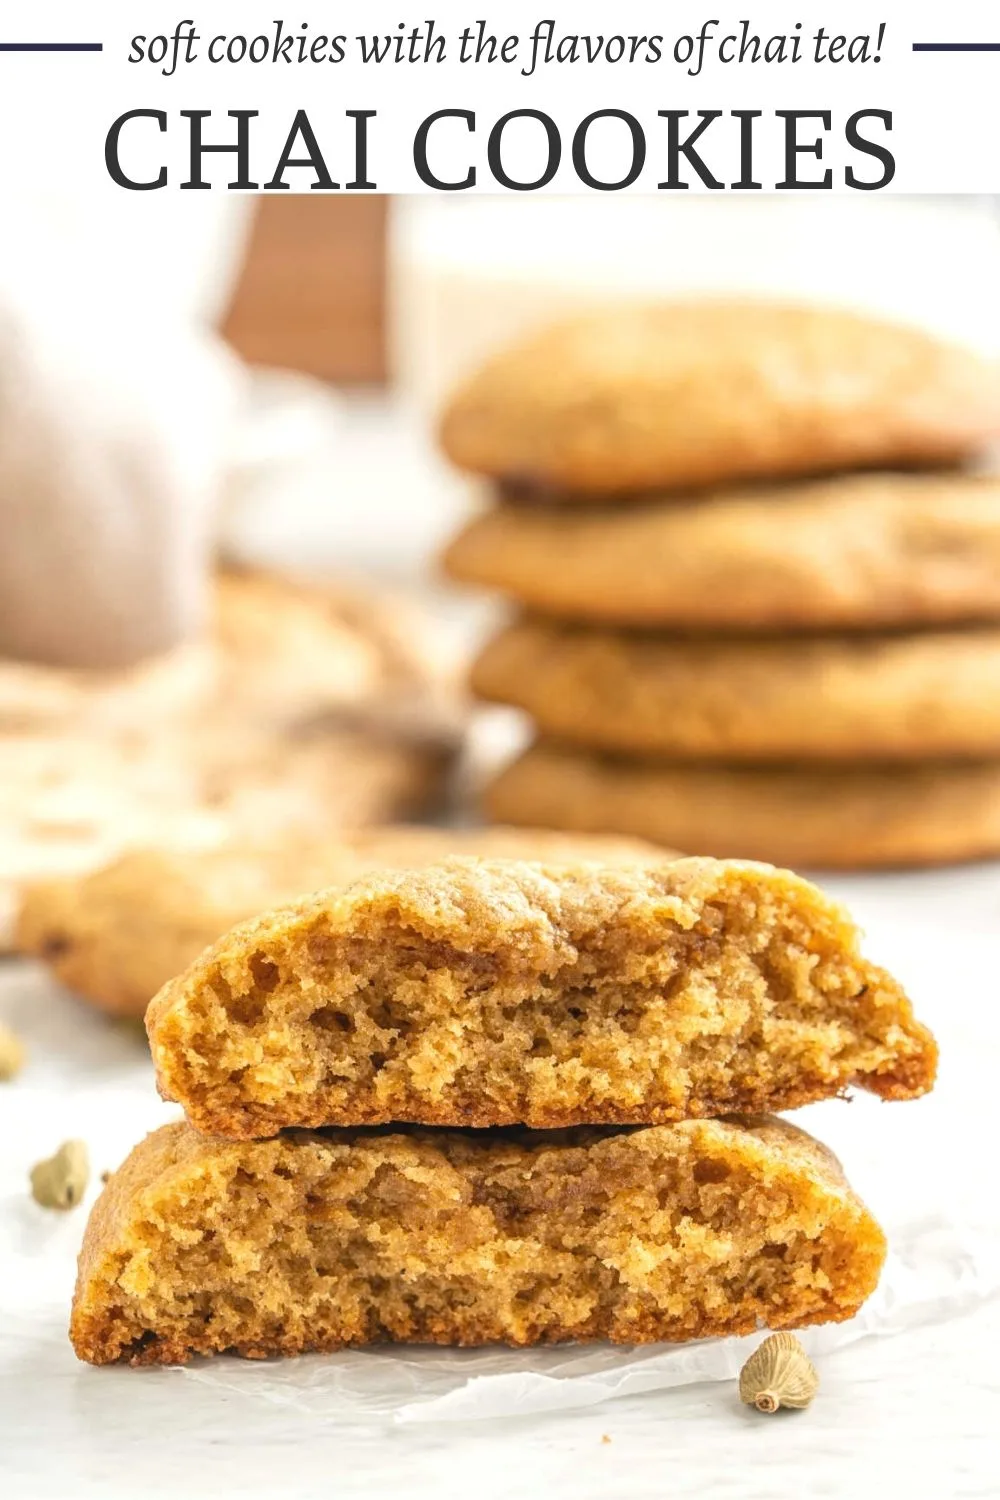 Chai cookies have all of the flavors you love in chai tea, but in a nice soft cookie. They feature the all of the spices in a lovely sweet dessert.